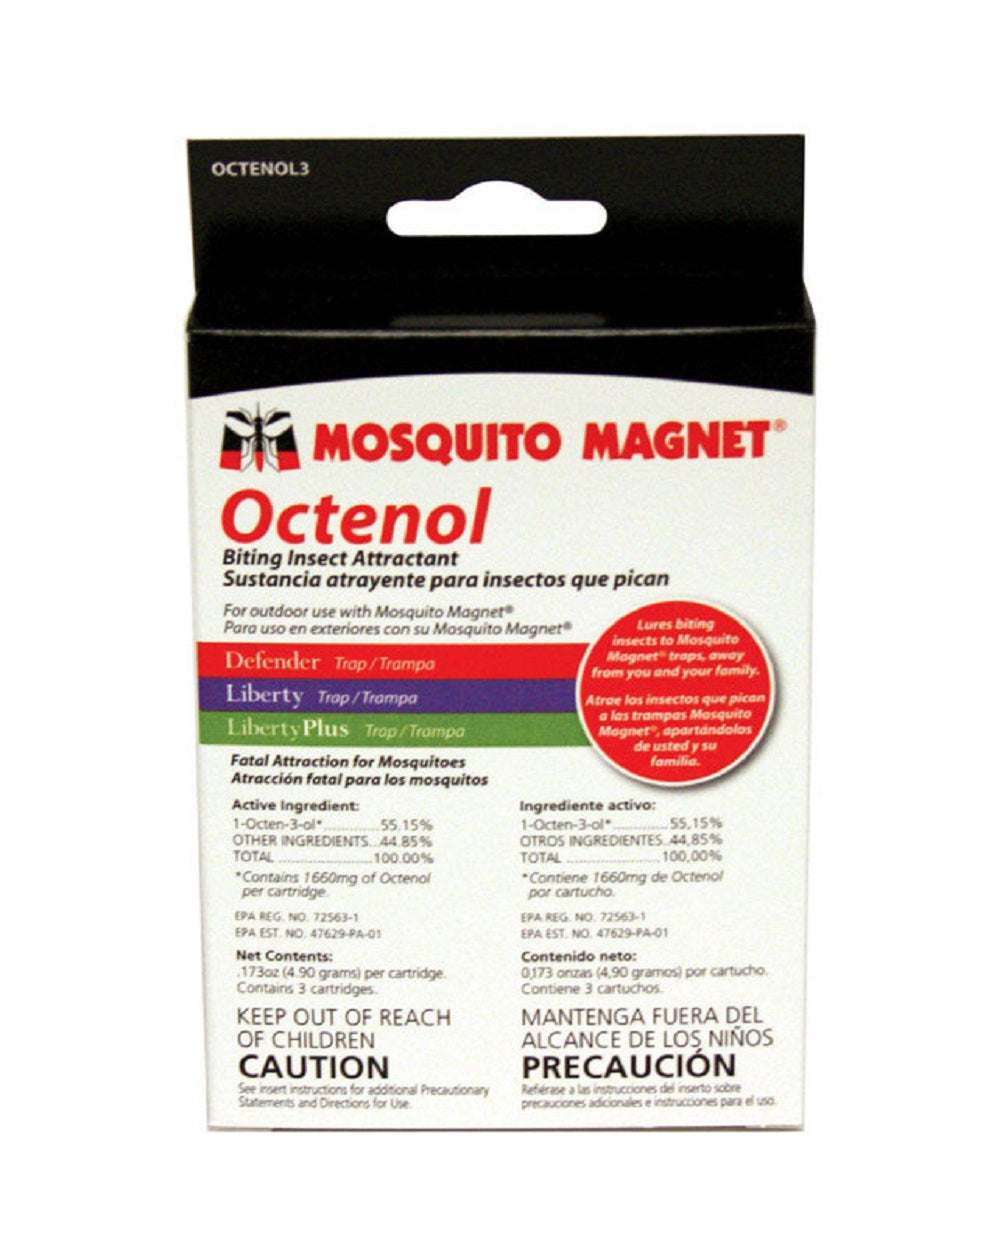 Mosquito Magnet OCTENOL3 Biting Insect Attractant